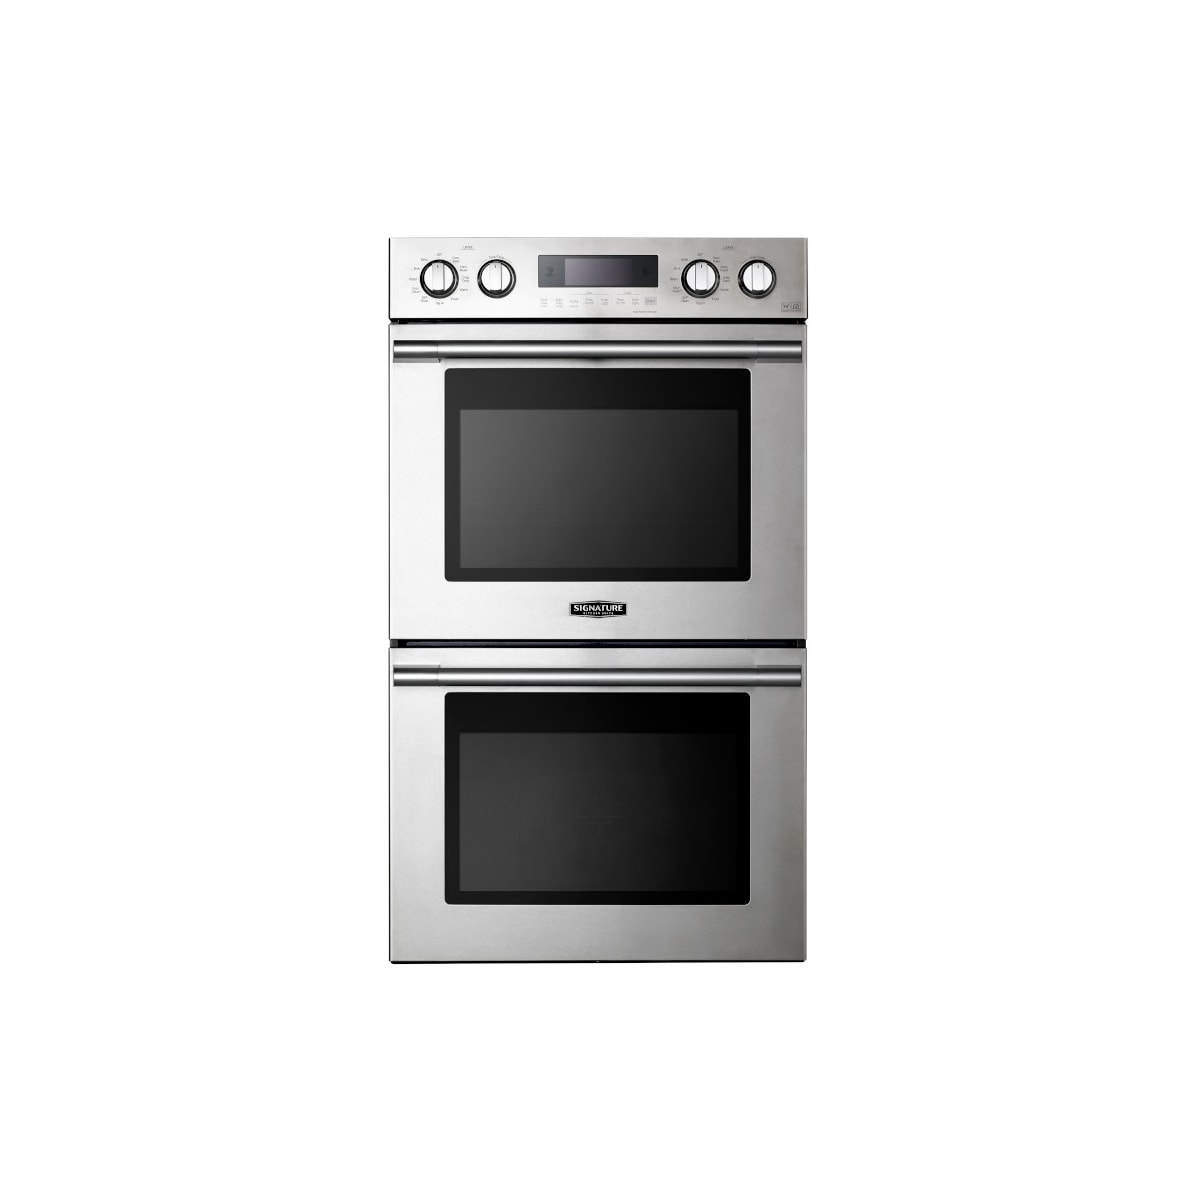 30-inch Combi Wall Oven  Signature Kitchen Suite